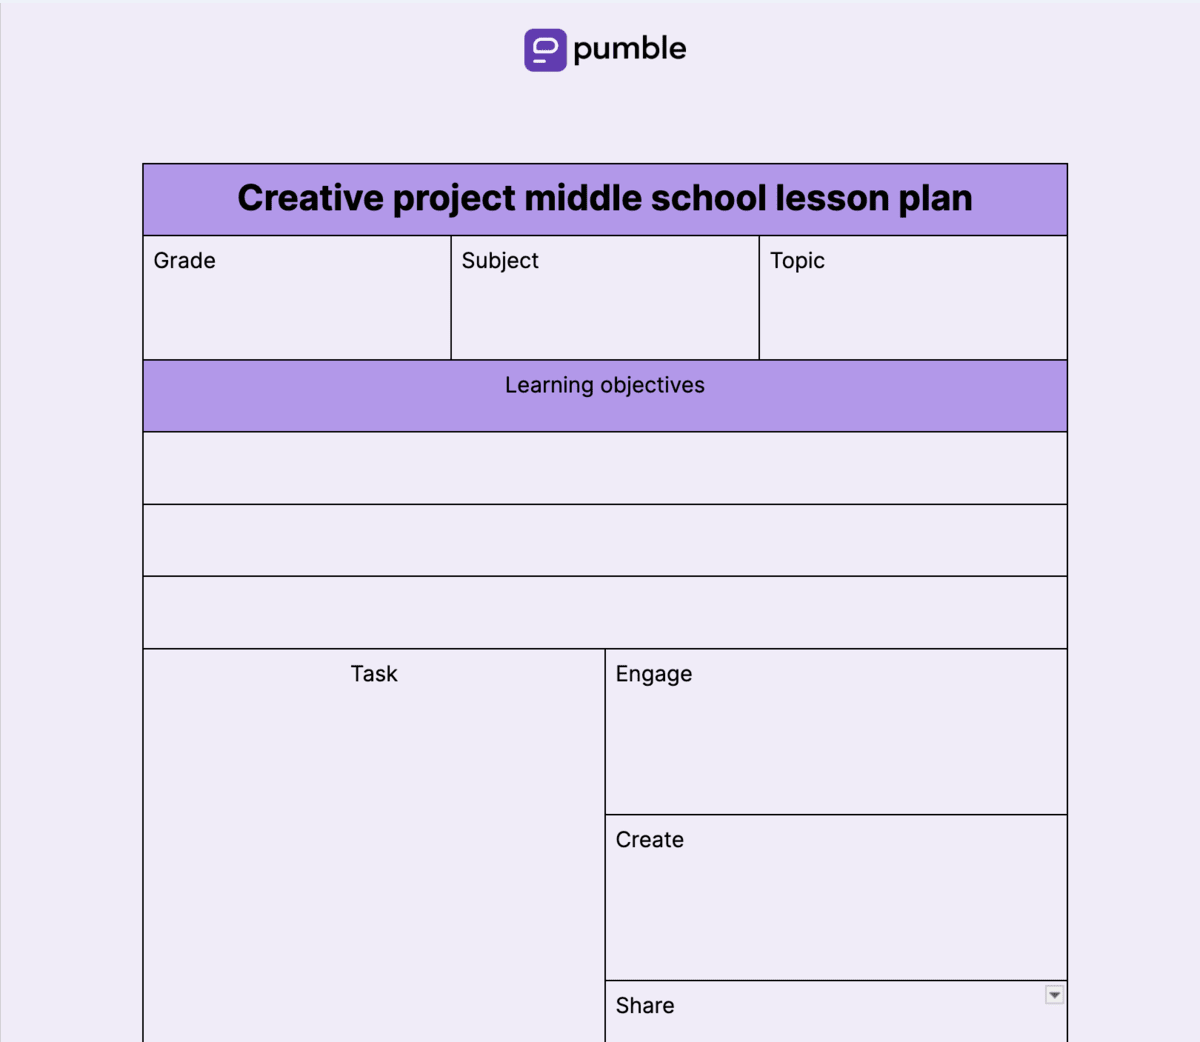 Creative project middle school lesson plan template